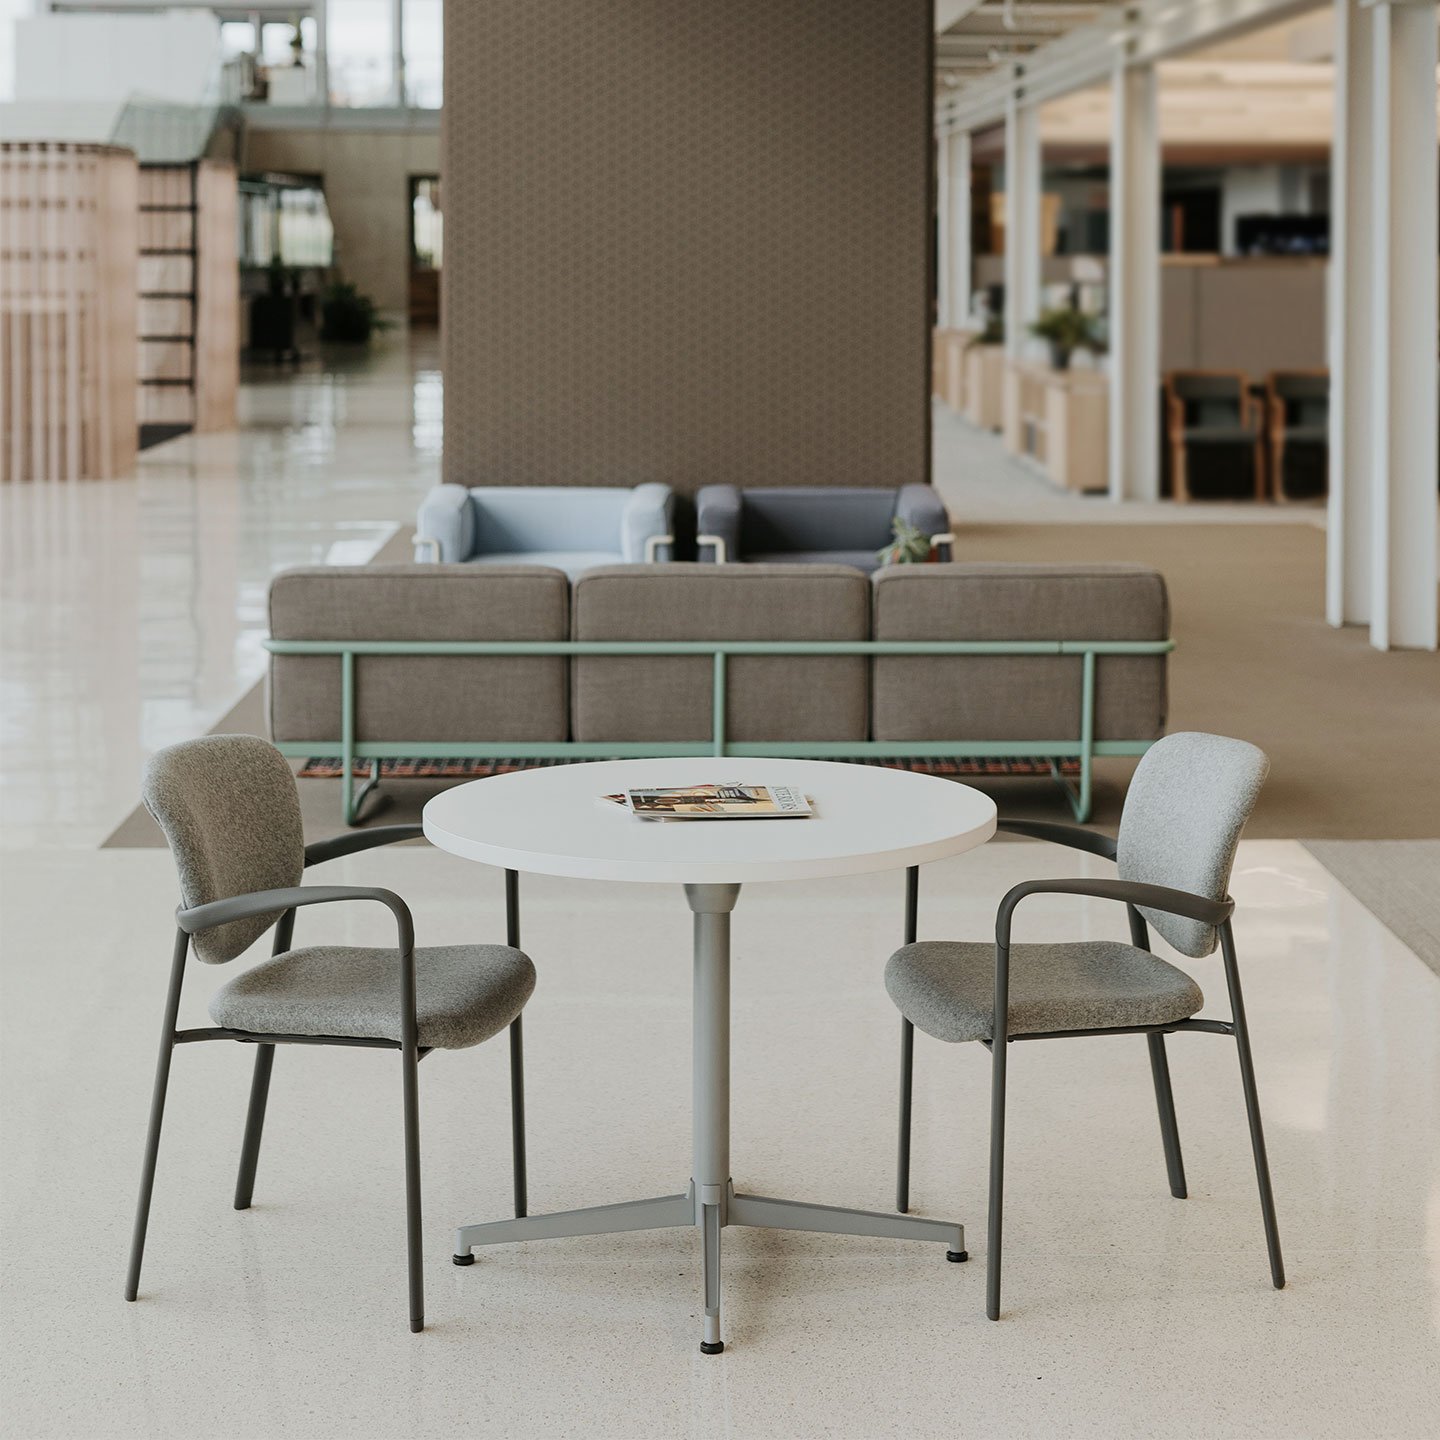 Haworth Improv Side chair in grey and beige upholstery in a lobby area